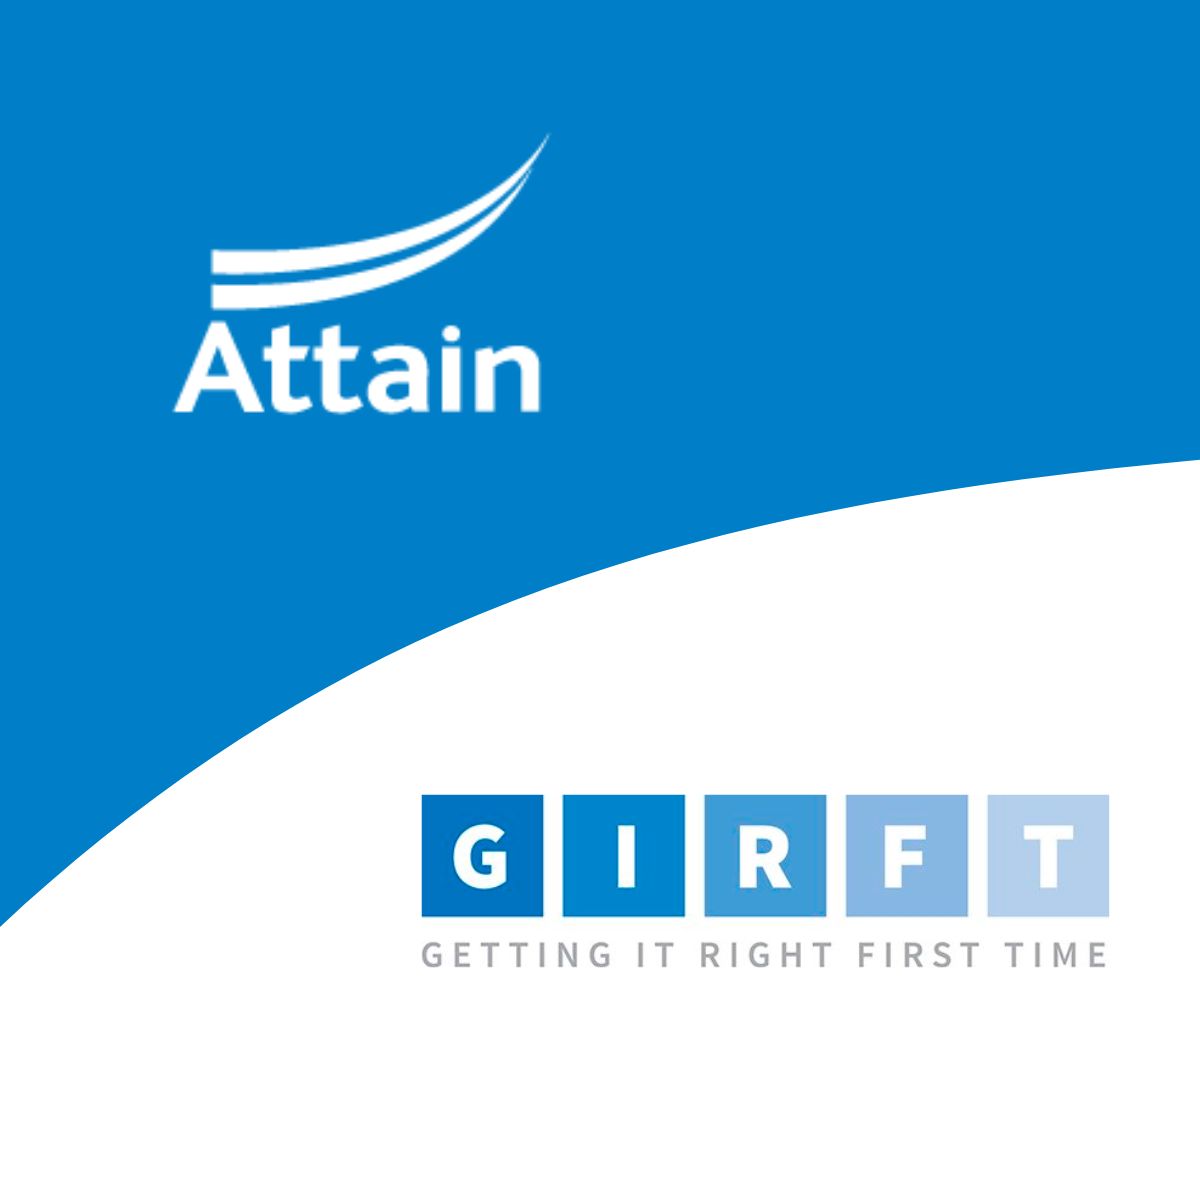 NHSE launches GIRFT Further Faster to swiftly transform clinical practices, aiming to cut 52-week waits. We're spearheading this initiative for an ICB, leveraging our expertise in elective recovery and outpatient transformation to accelerate progress. attain.co.uk/expertise/